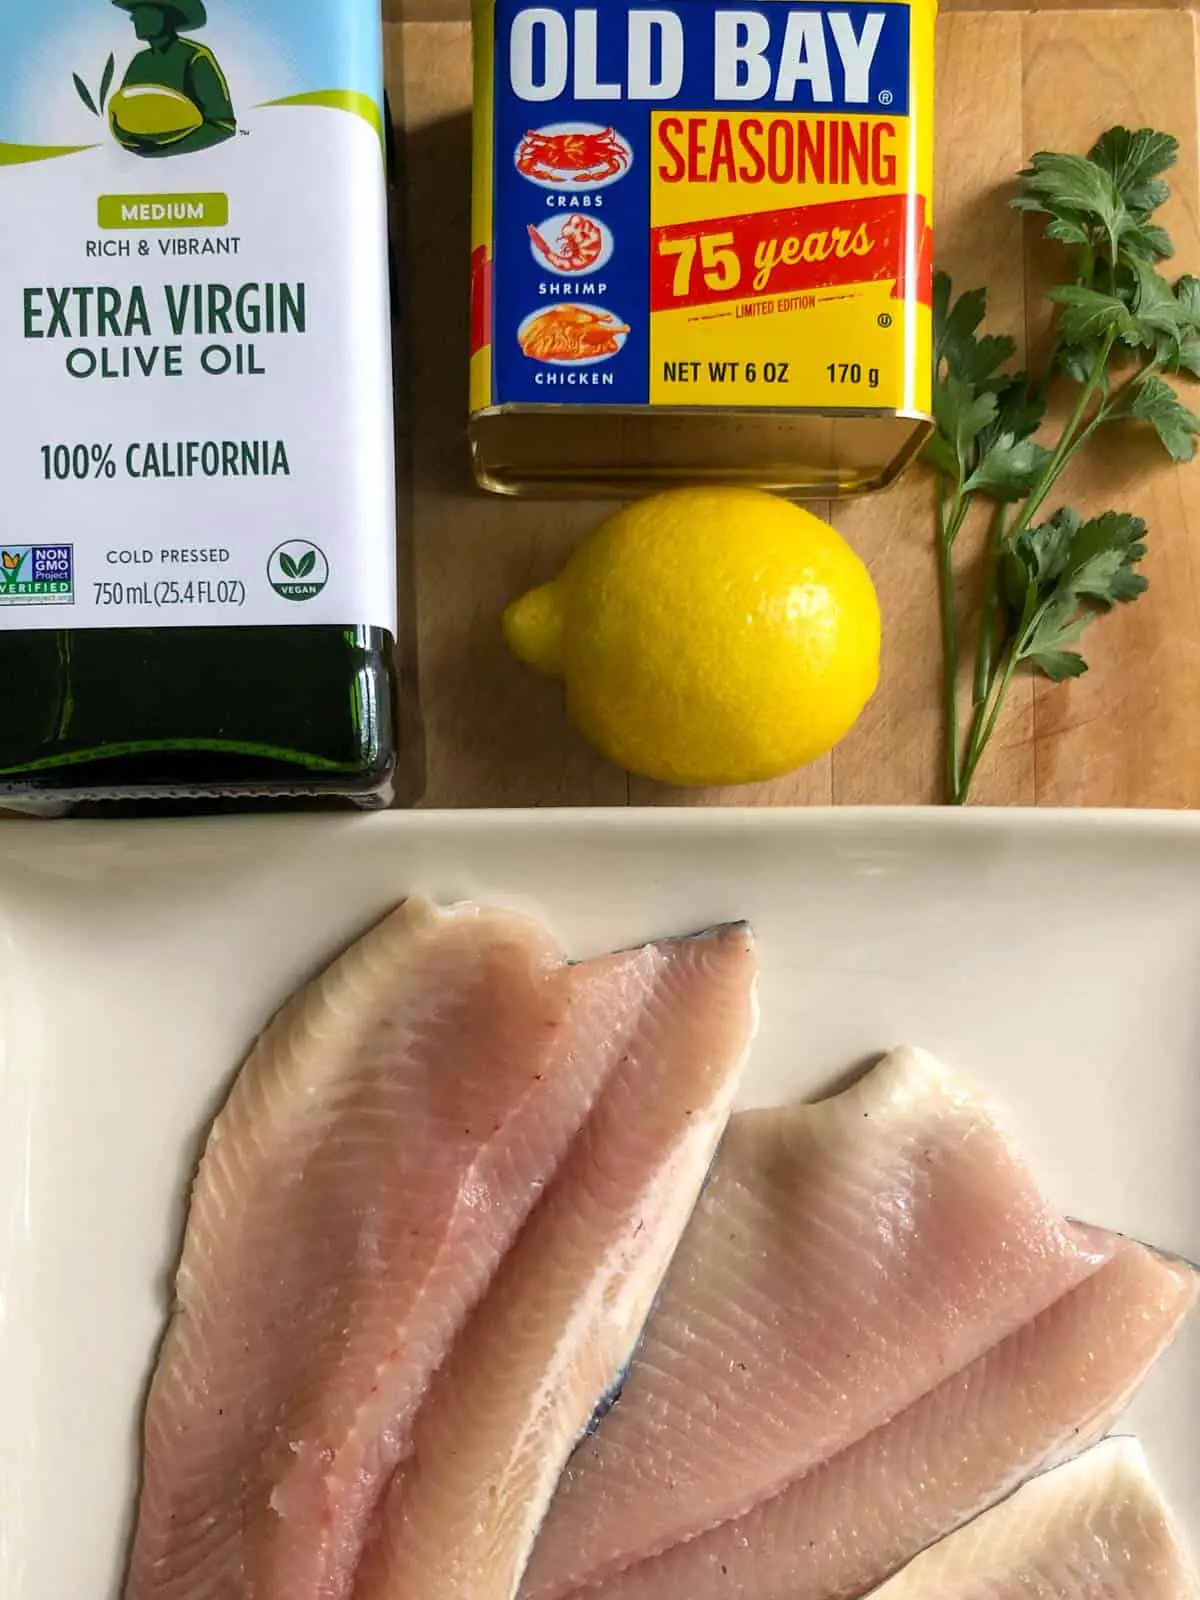 3 filets of rainbow trout on a plate with a bottle of extra virgin olive oil, old bay seasoning, a lemon and Italian parsley above the plate.